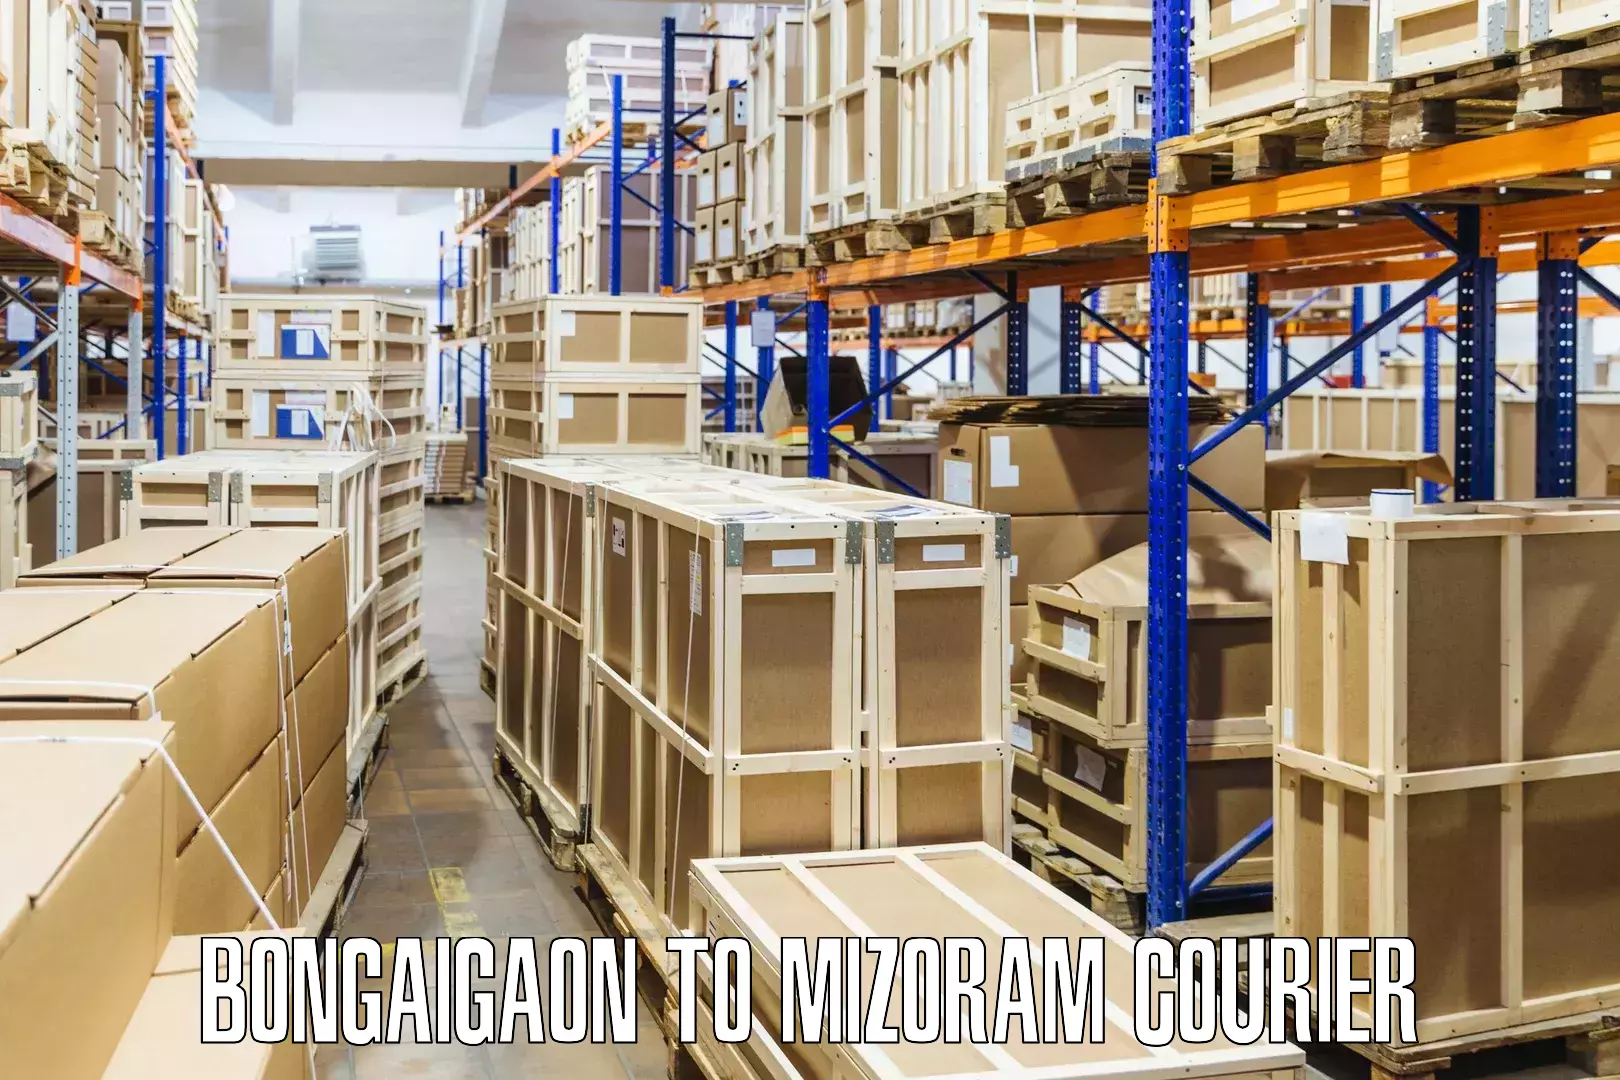 Courier service efficiency in Bongaigaon to Mizoram